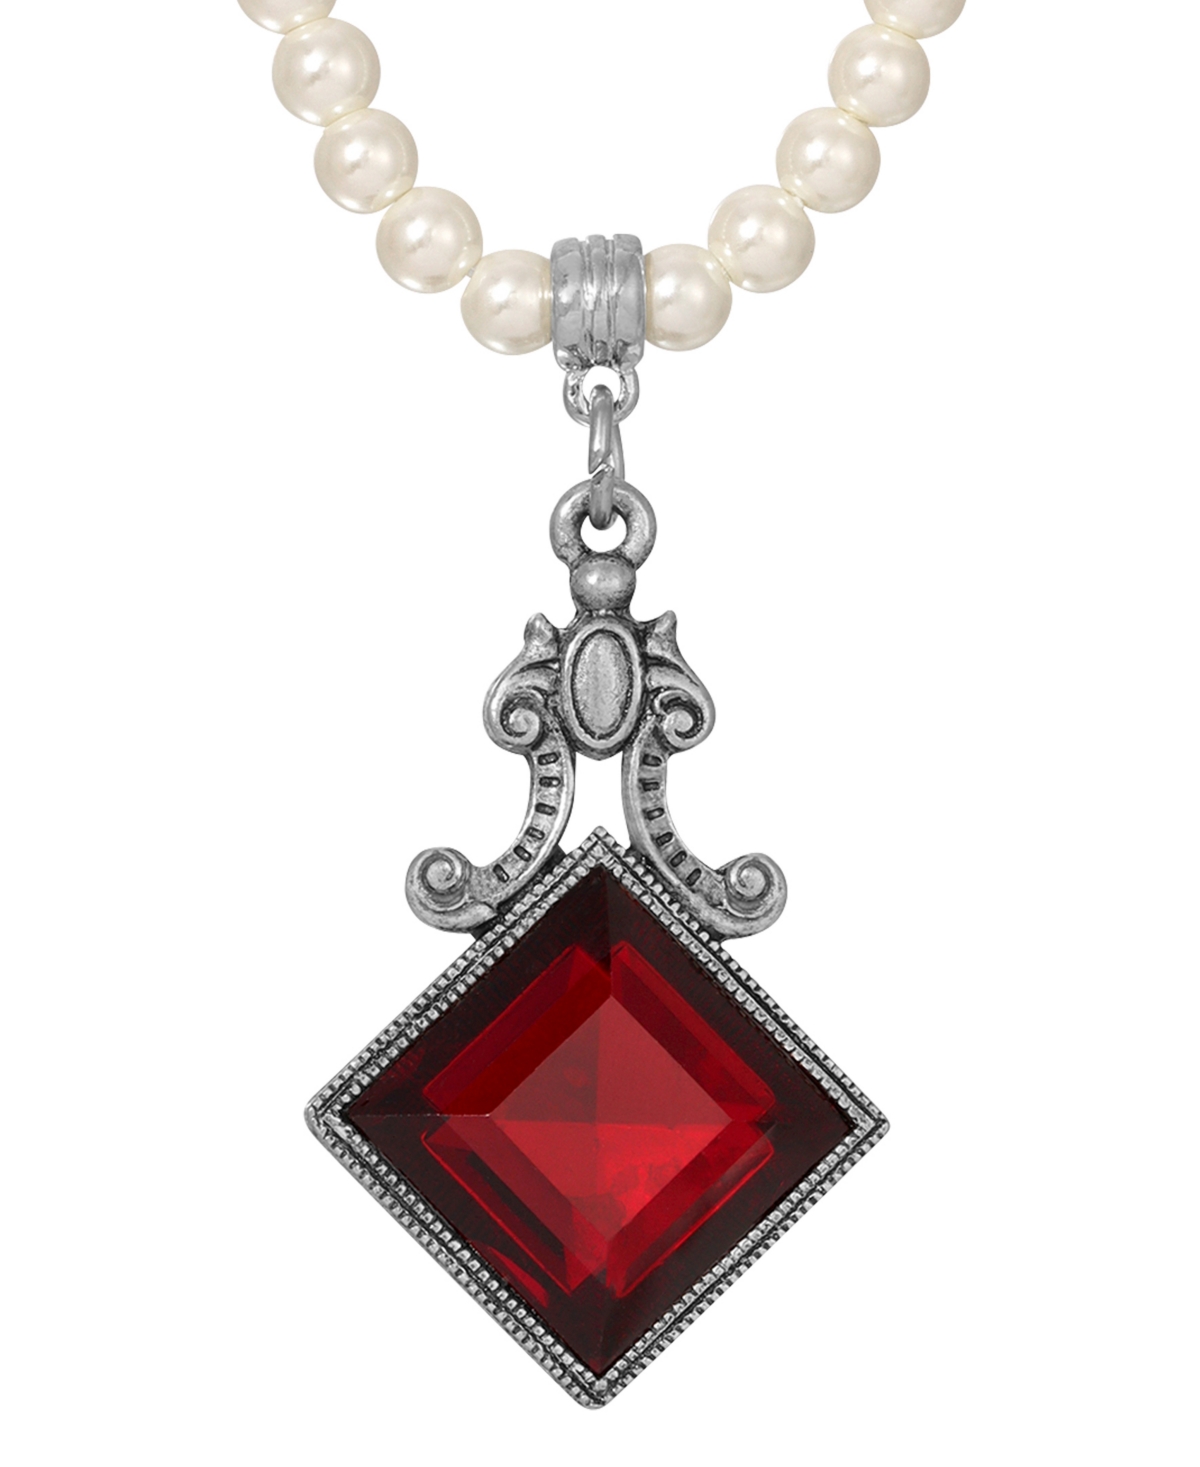 Shop 2028 Imitation Pearl Red Glass Pendant Necklace